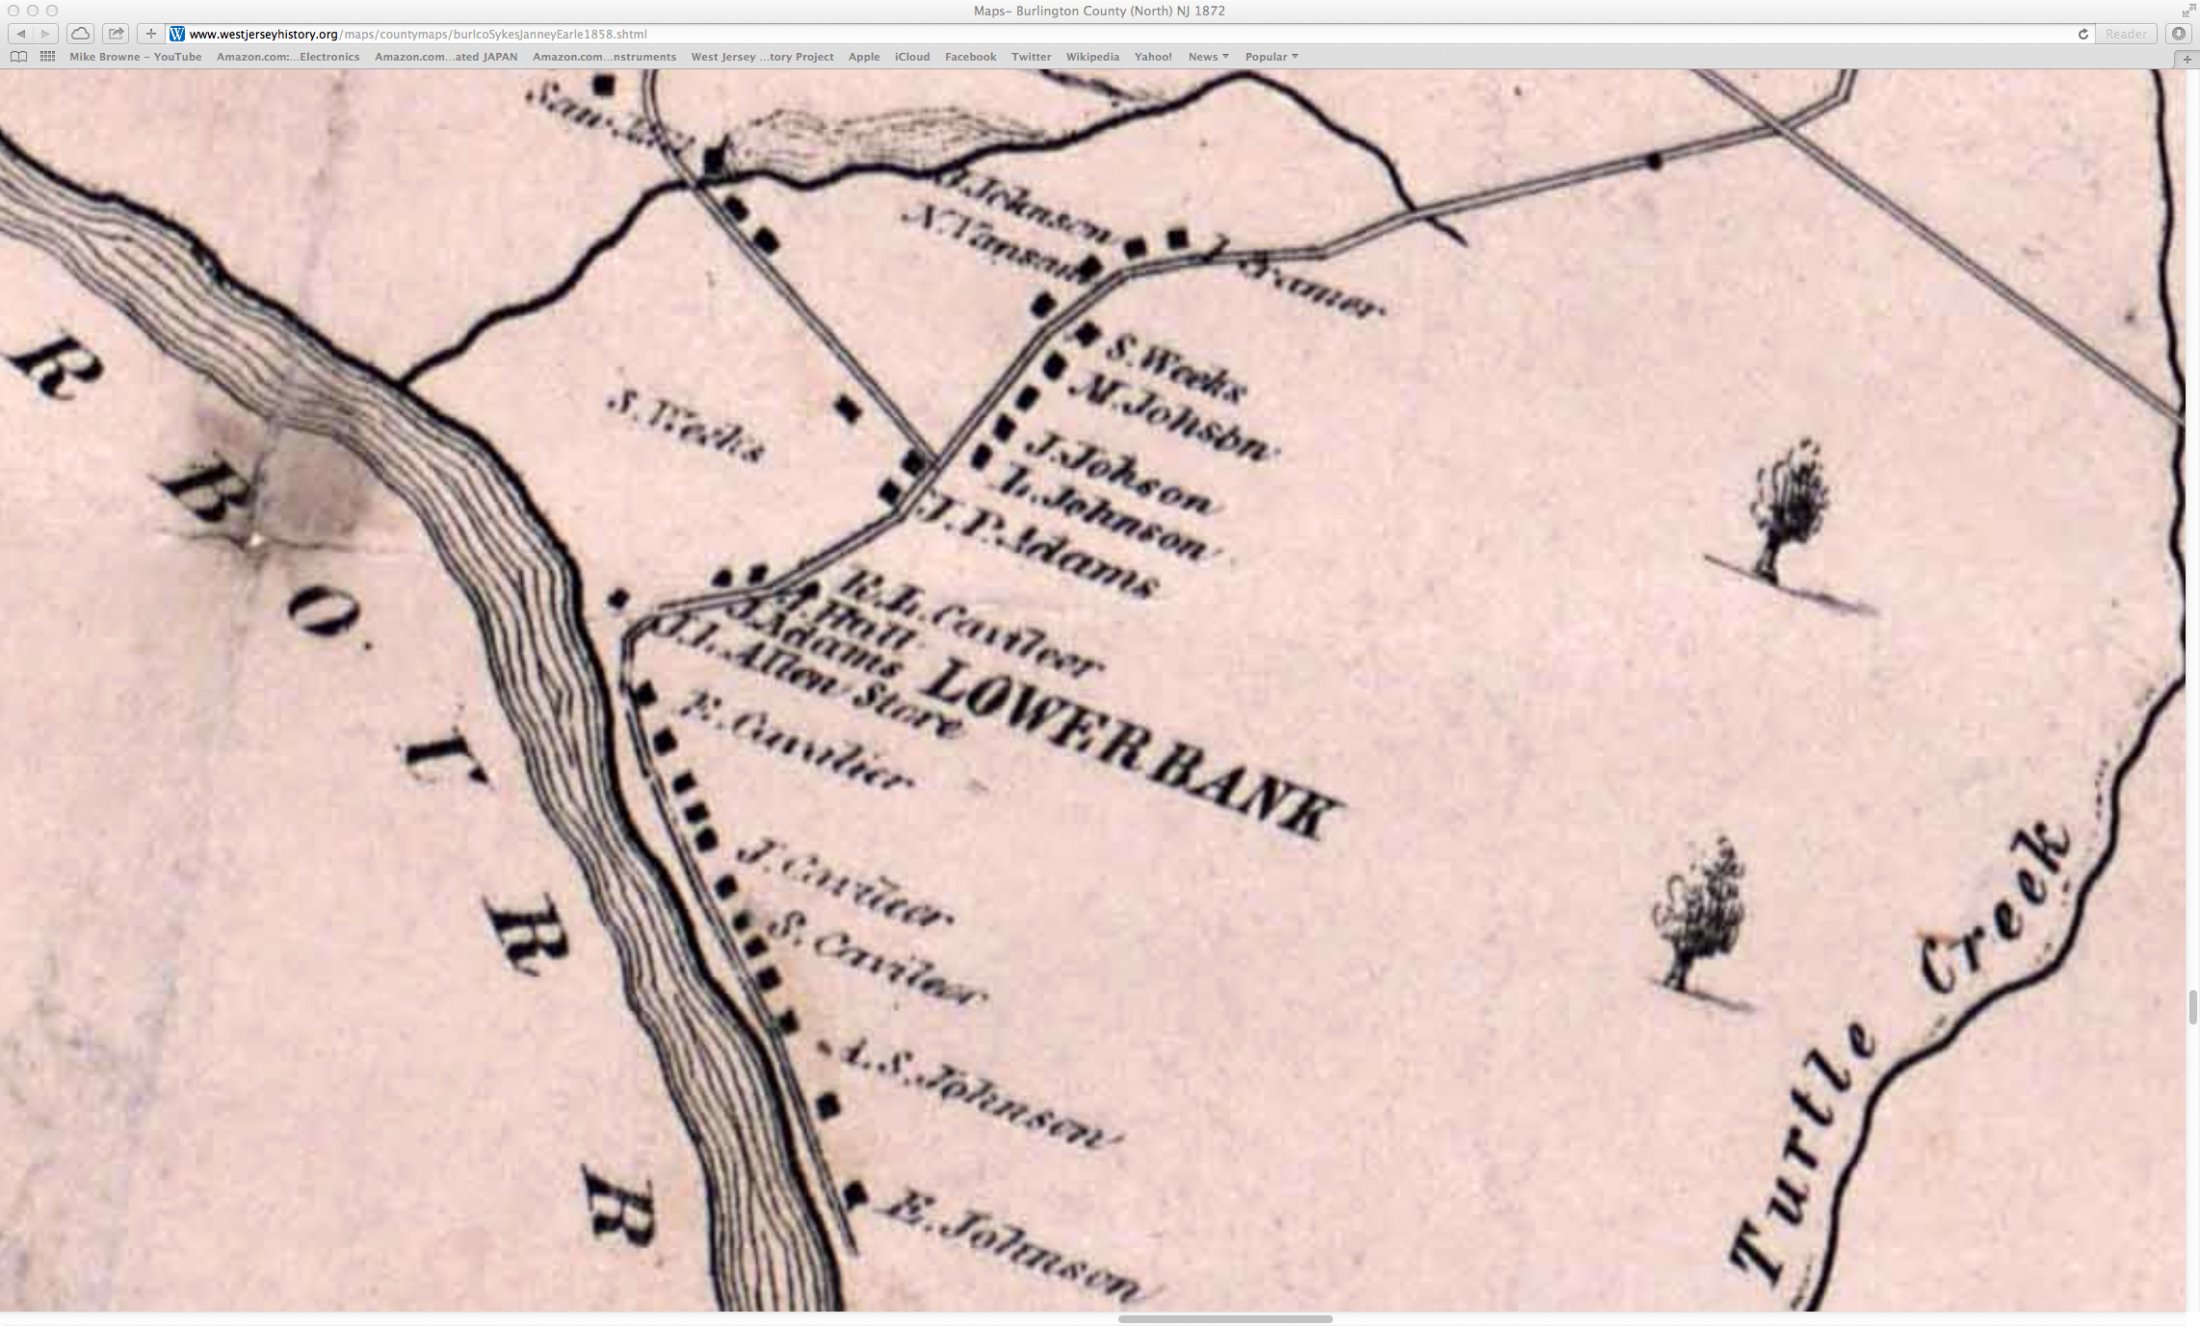 lower bank - Sykes Janney and Earle Map of Burlington County 1858